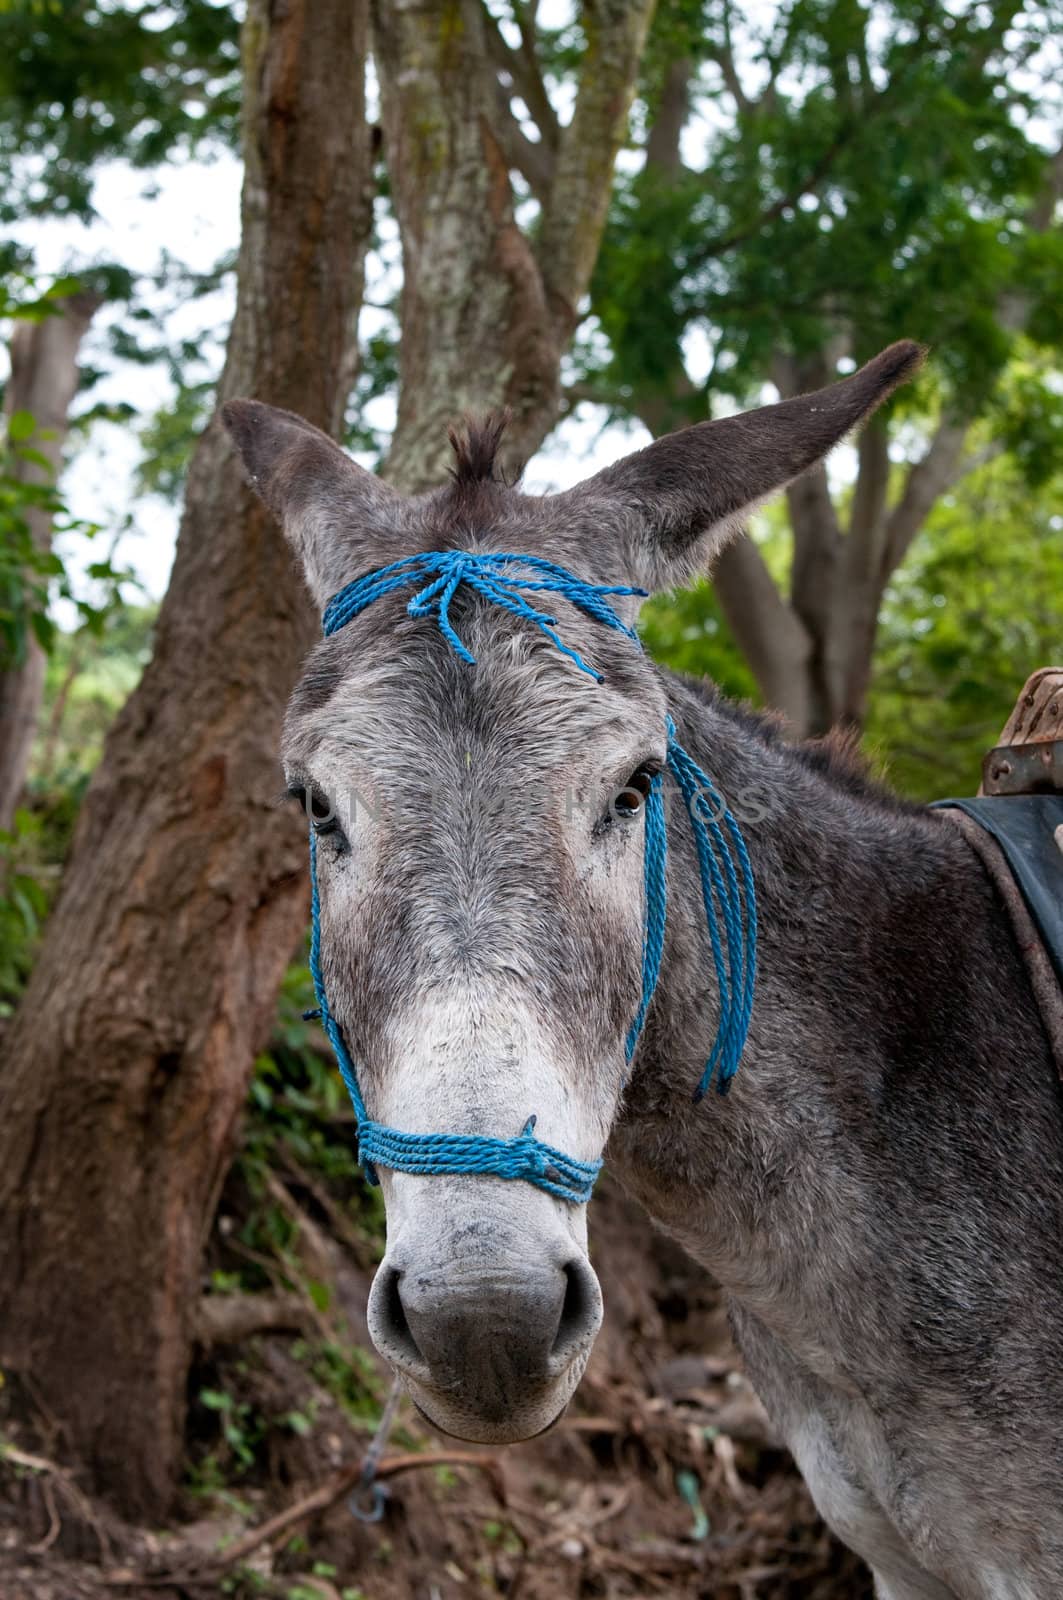 THe picture of the donkey from Nicaragua